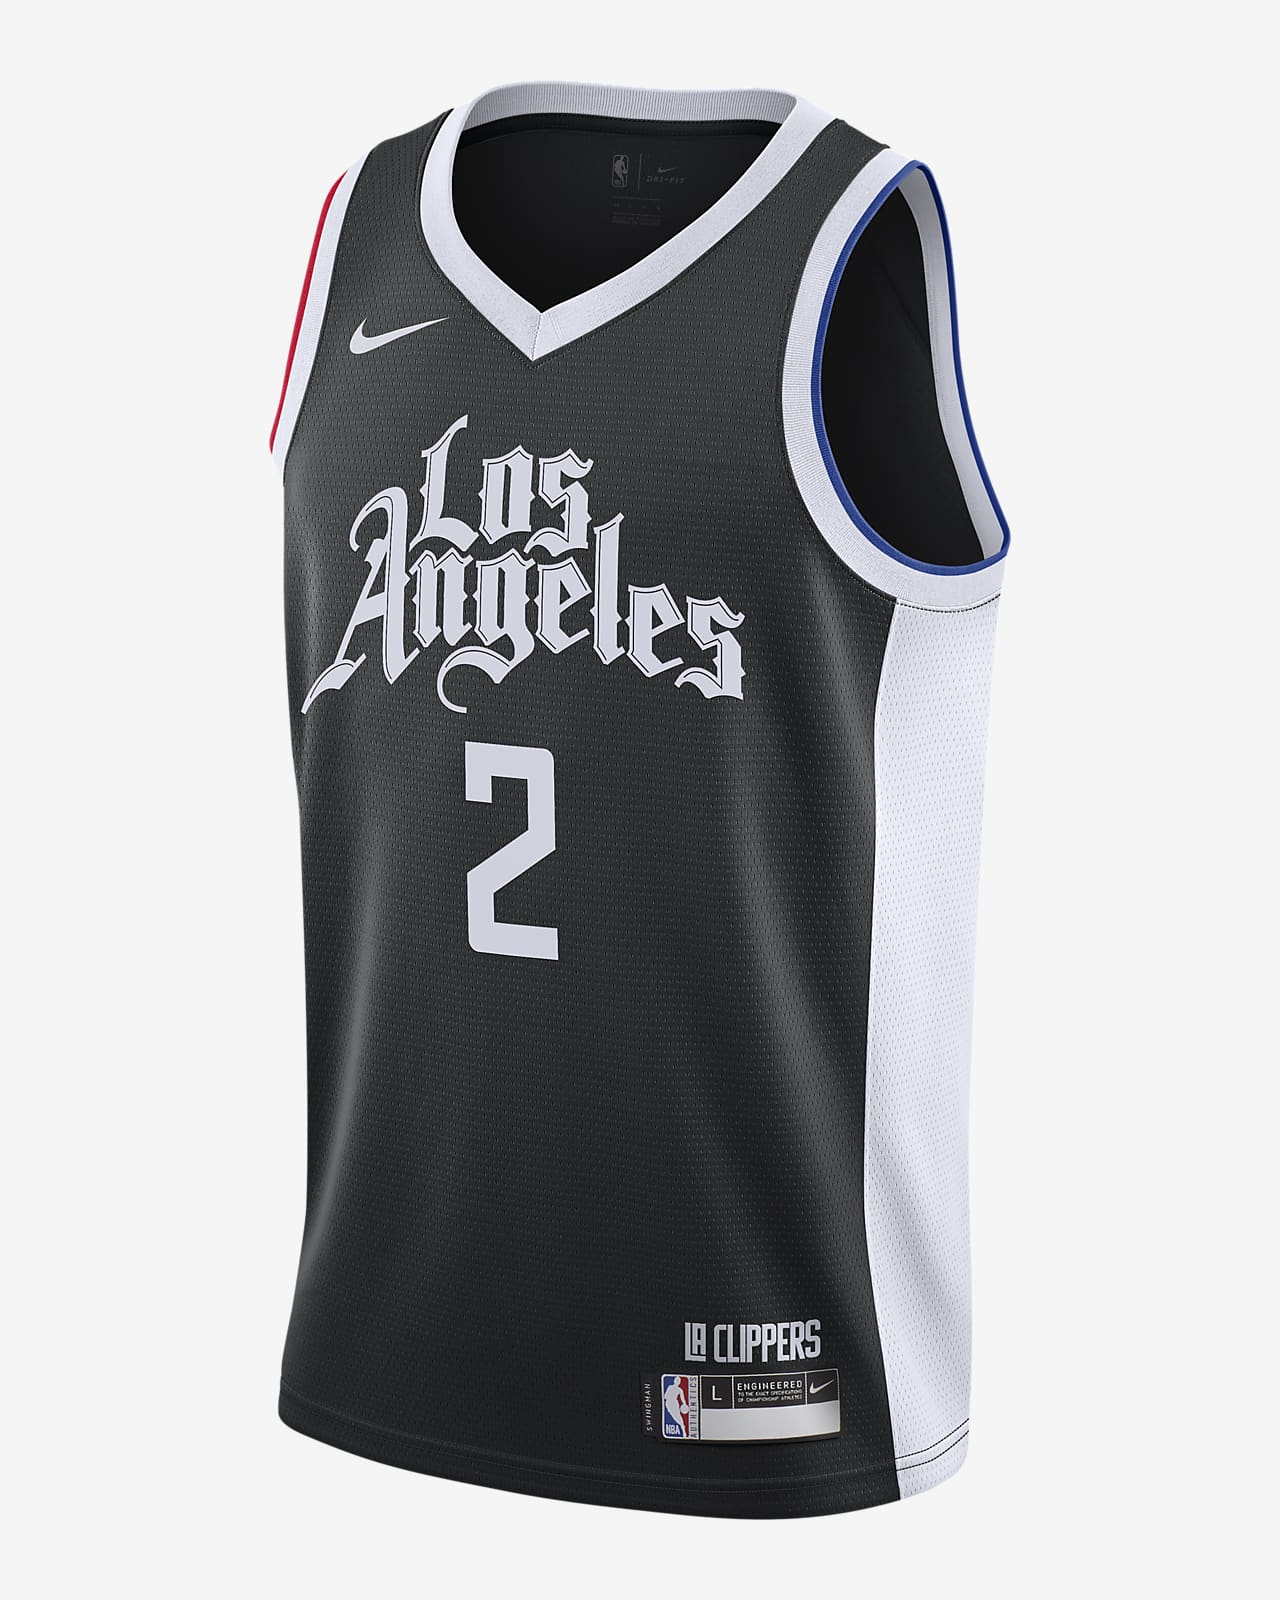 clippers city jersey kawhi